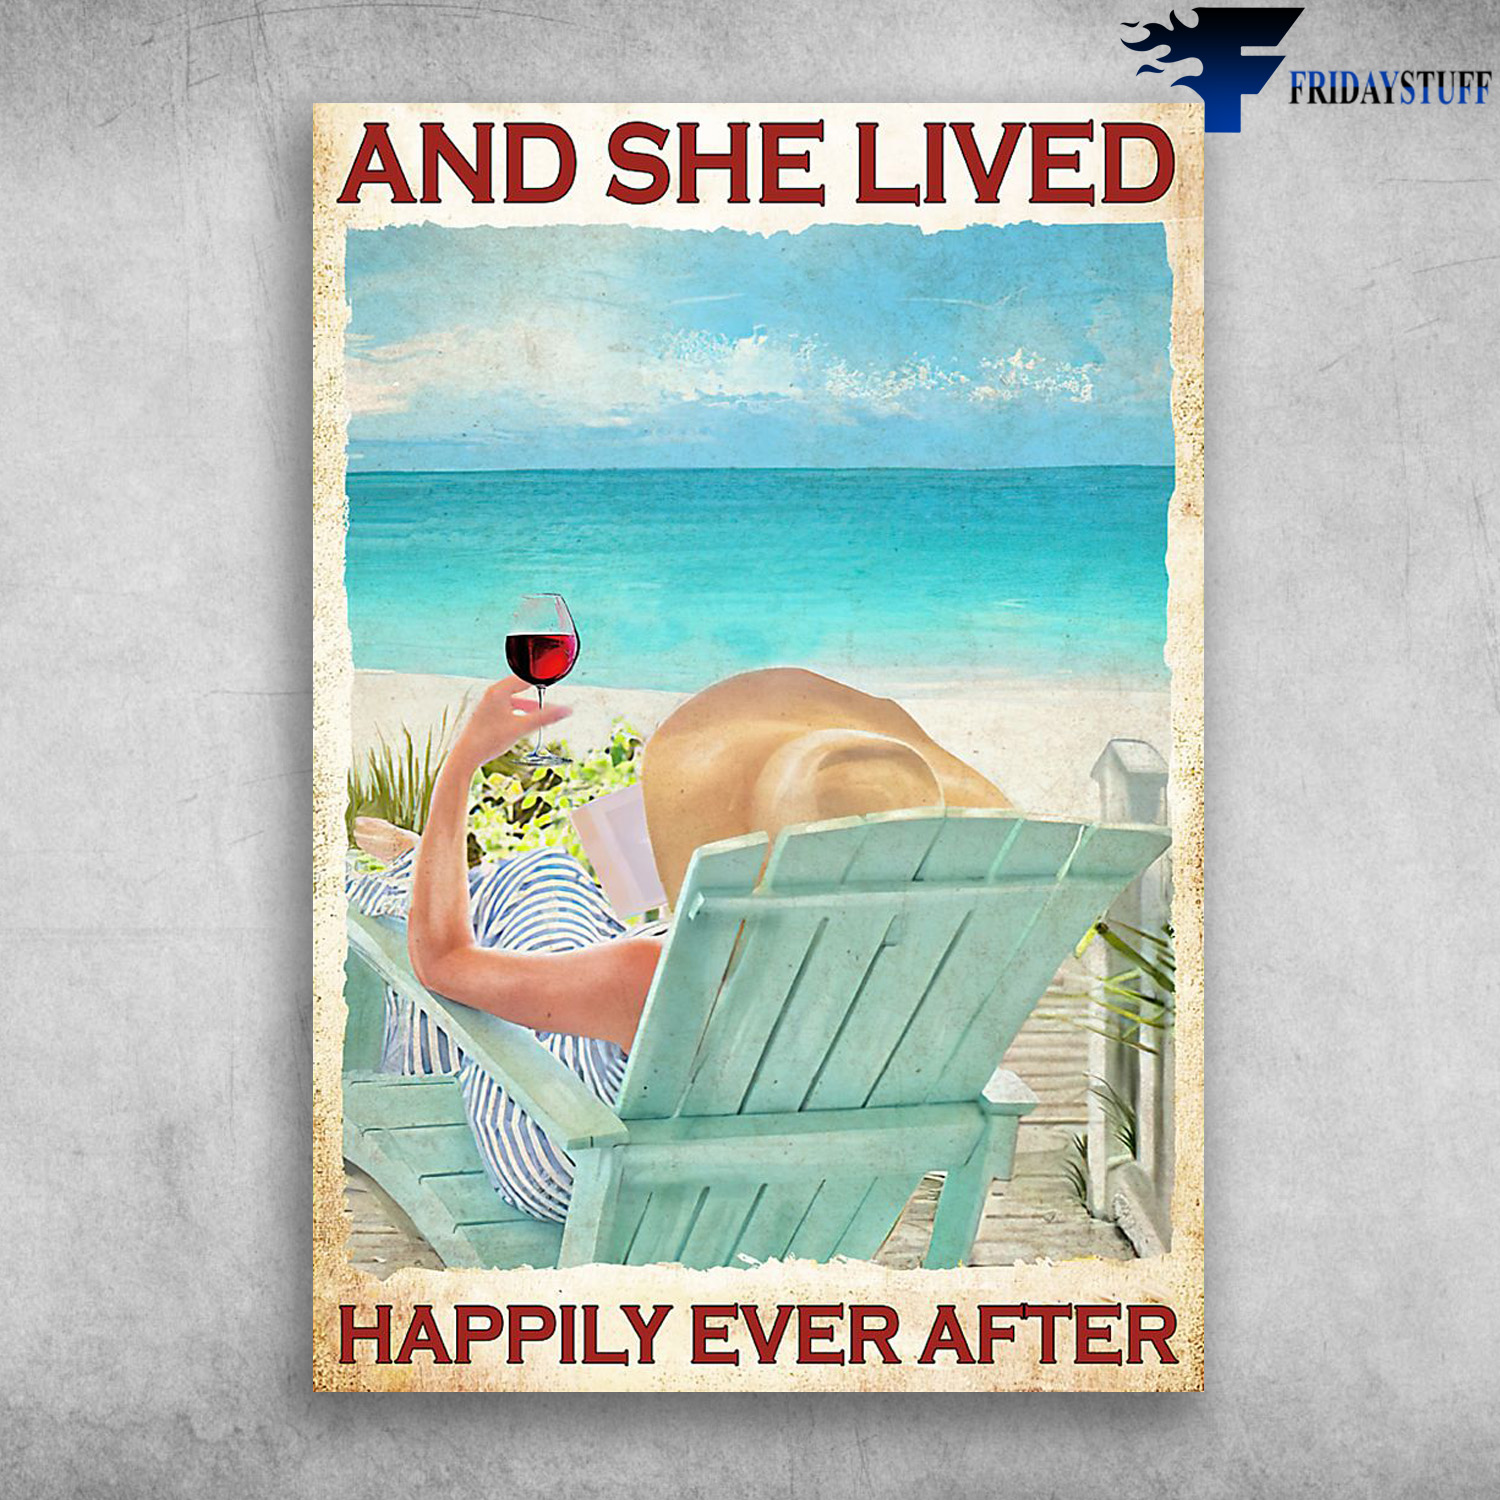 Girl Reading Book, Drinking Wine, On The Beach - And She Lived, Happily Ever After